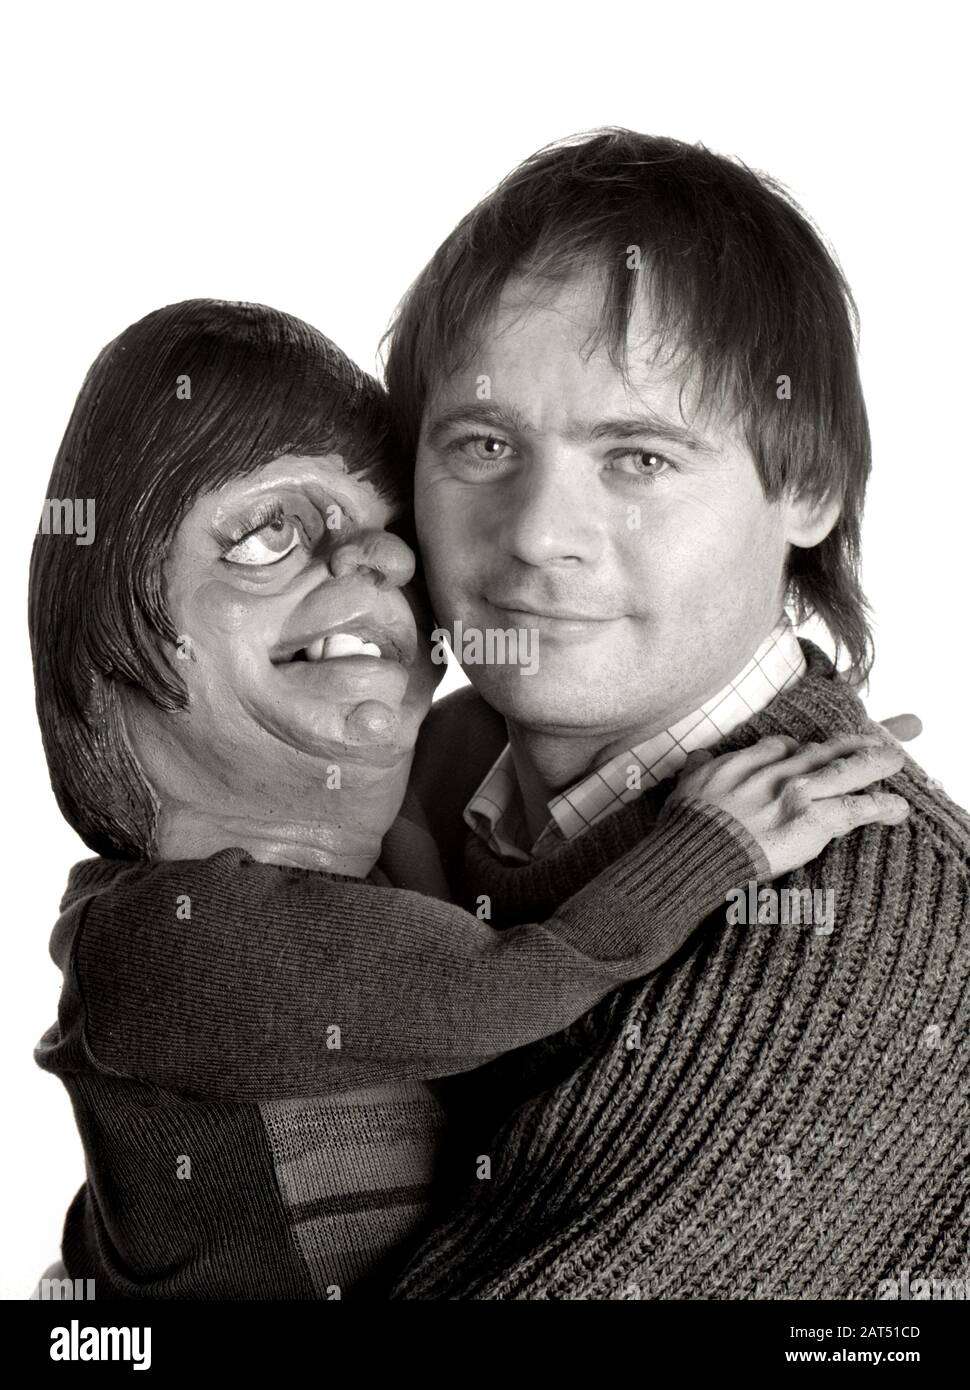 John Lloyd - Comedy Writer & Producer. Portrait taken in 1988 showing him with his Spitting Image puppet. Stock Photo